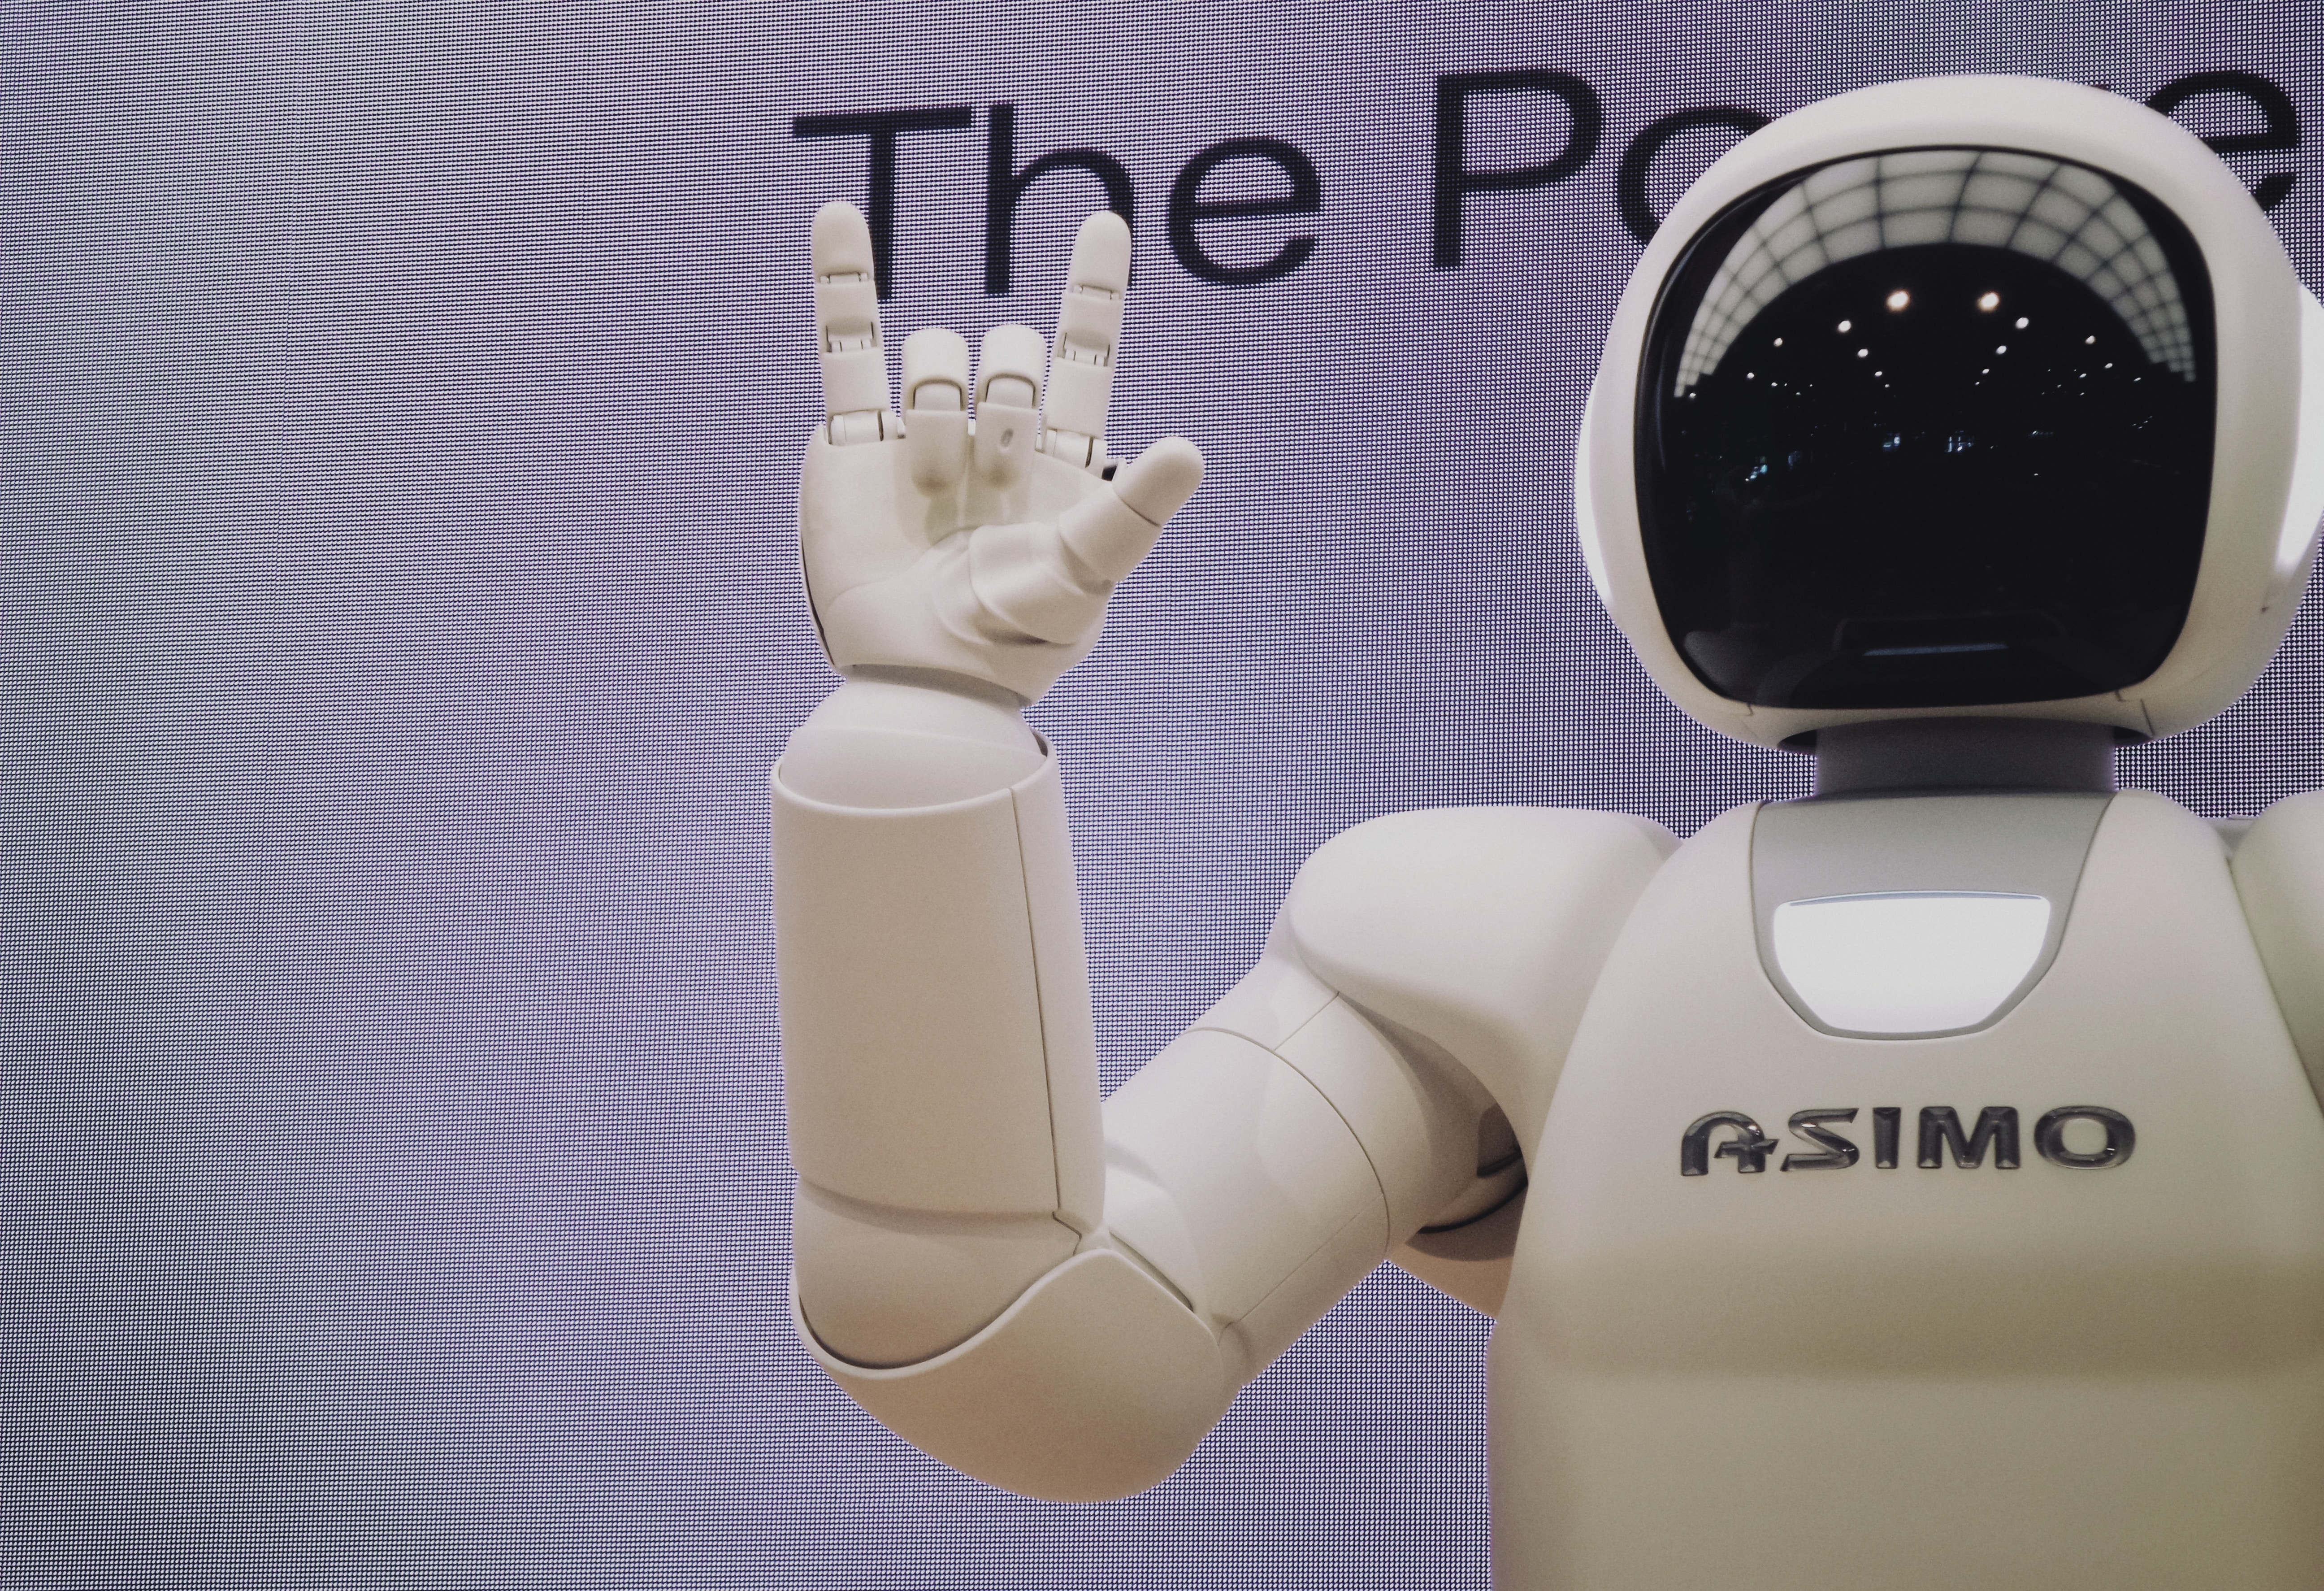 A picture pop the robot Asimo